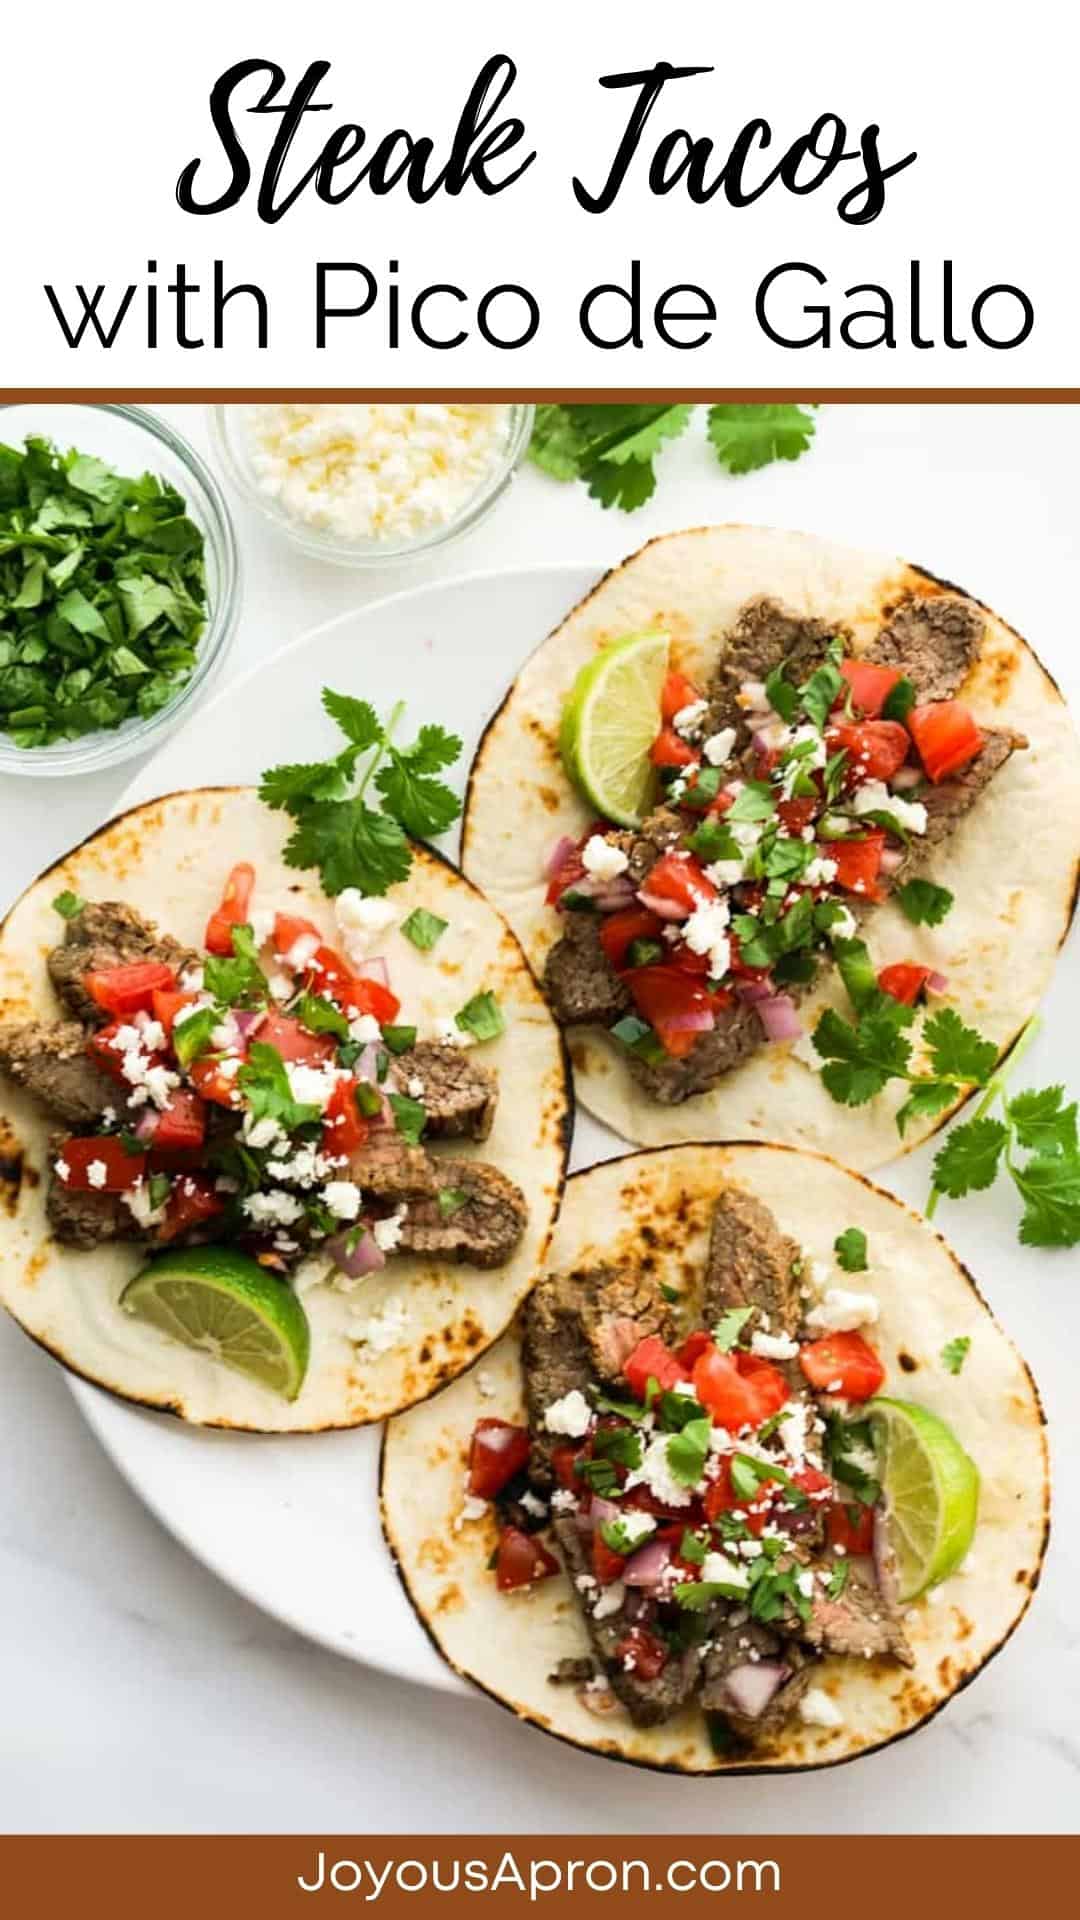 Grilled Steak Tacos - a simple beef taco recipe made on the grill or grill pan. Wrapped in flour tortilla and topped with tomatoes, jalepenos and lime juice mixture, queso fresco and more cilantro. Easy, healthy and delicious! Makes for an easy dinner meal. via @joyousapron